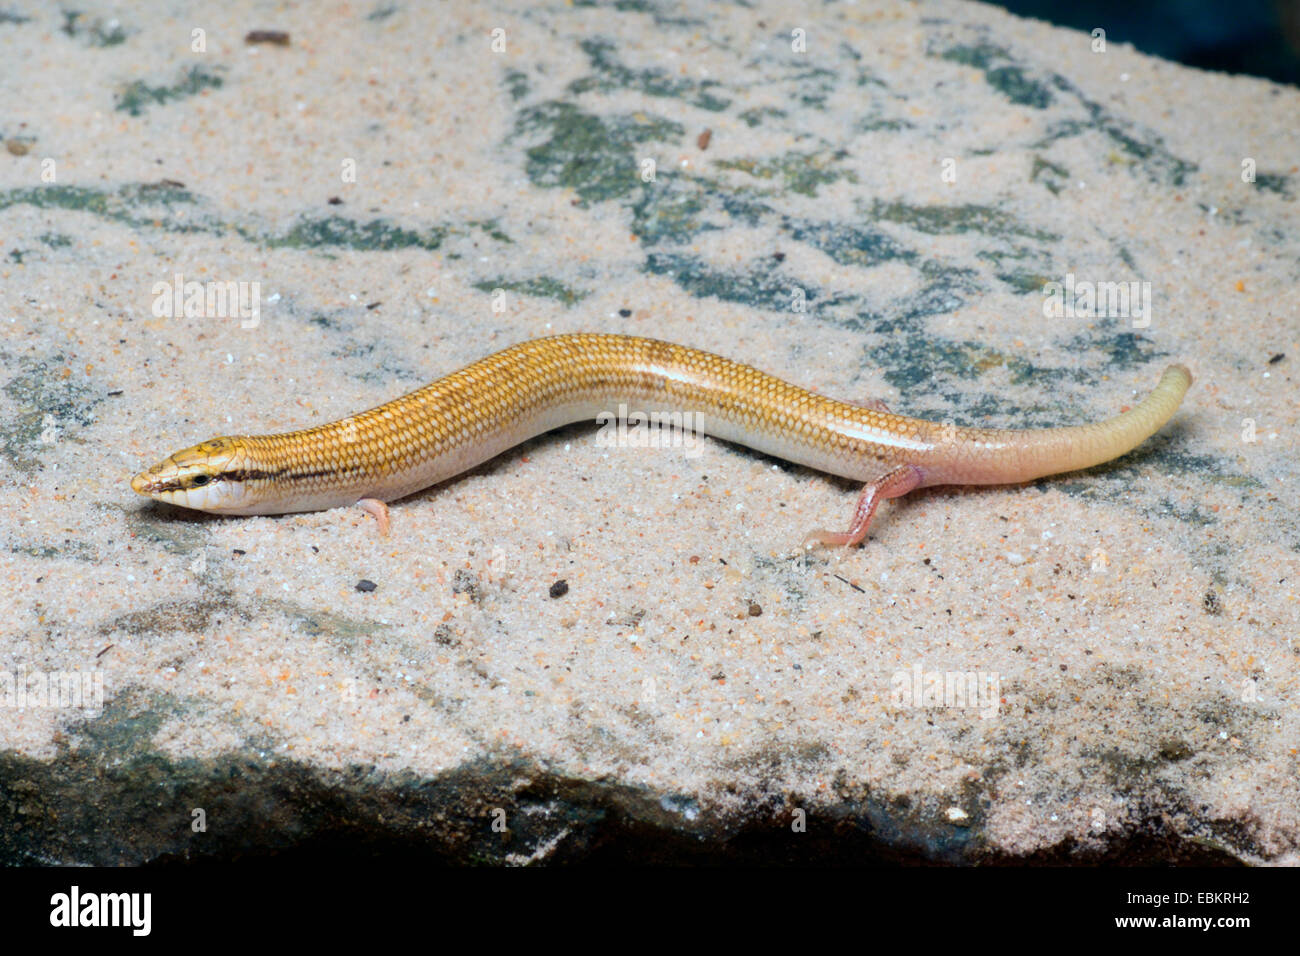 Cuneo-snouted skink, cilindro allungato (skink Chalcides sepsoides), vista laterale Foto Stock